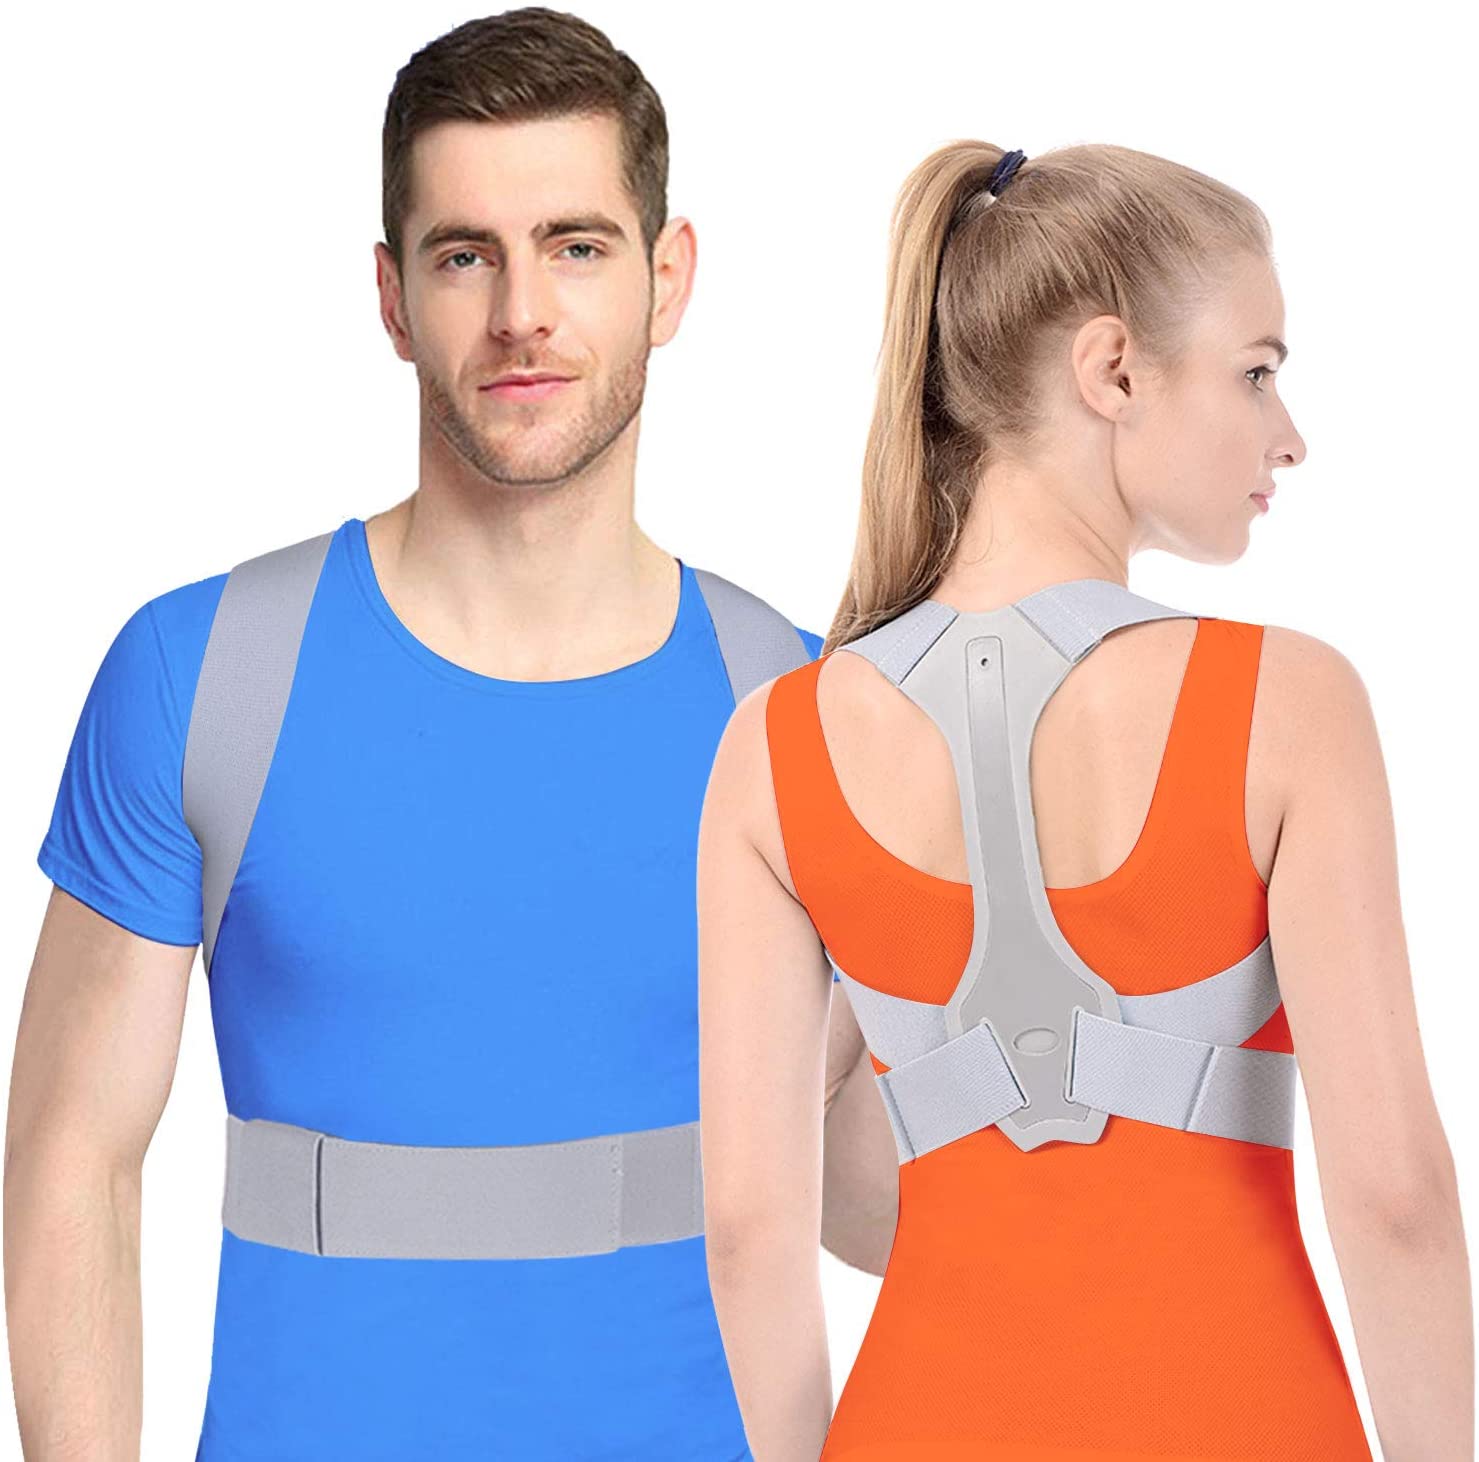 Anoopsyche Posture Corrector for Women and Men